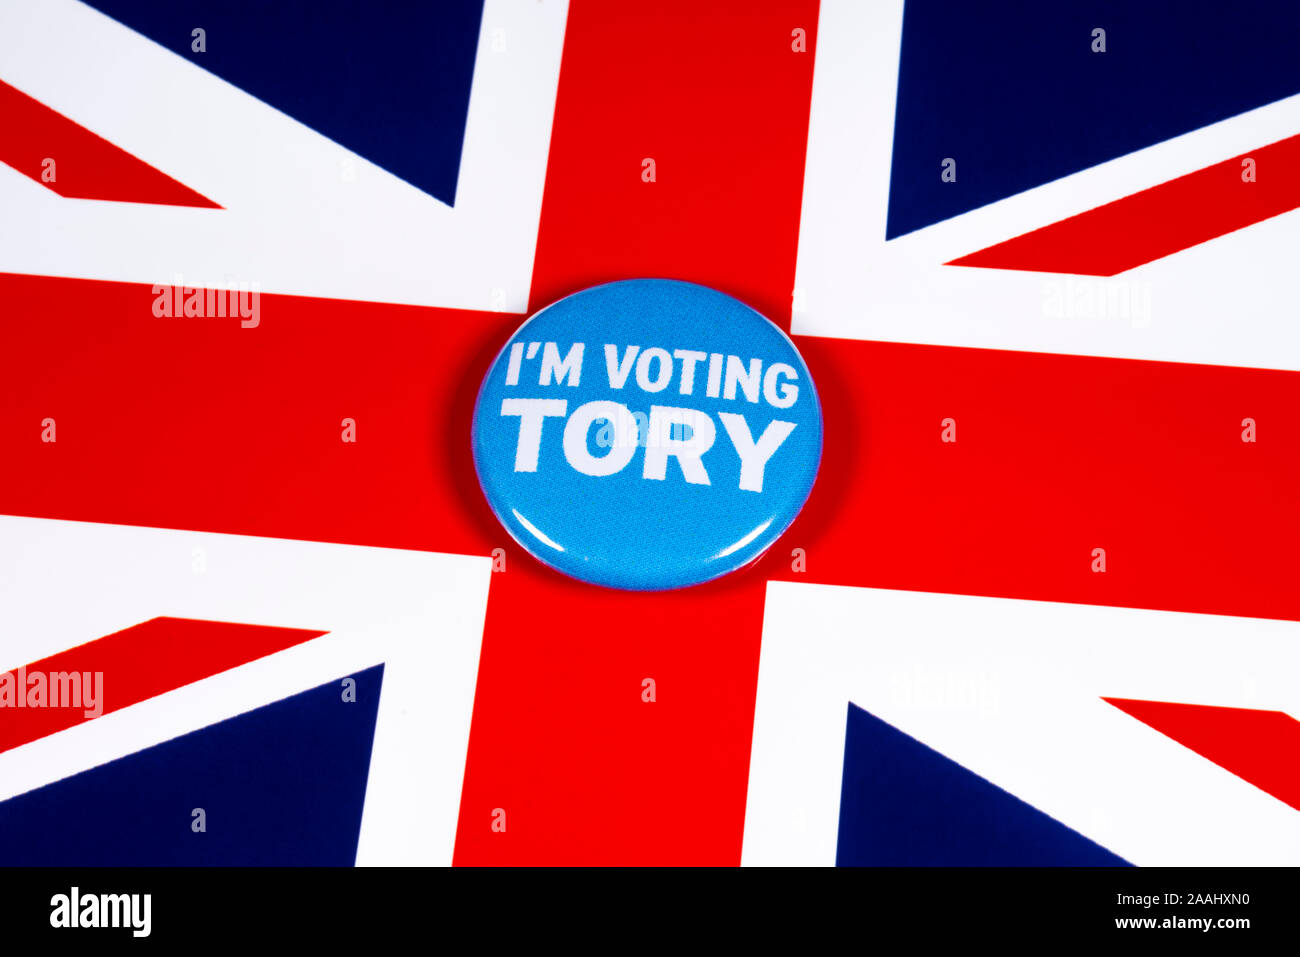 London, UK - November 21st 2019: I’m Voting Tory pin badge, pictured over the United Kingdom flag. The UK General Election is taking place on 12th Dec Stock Photo